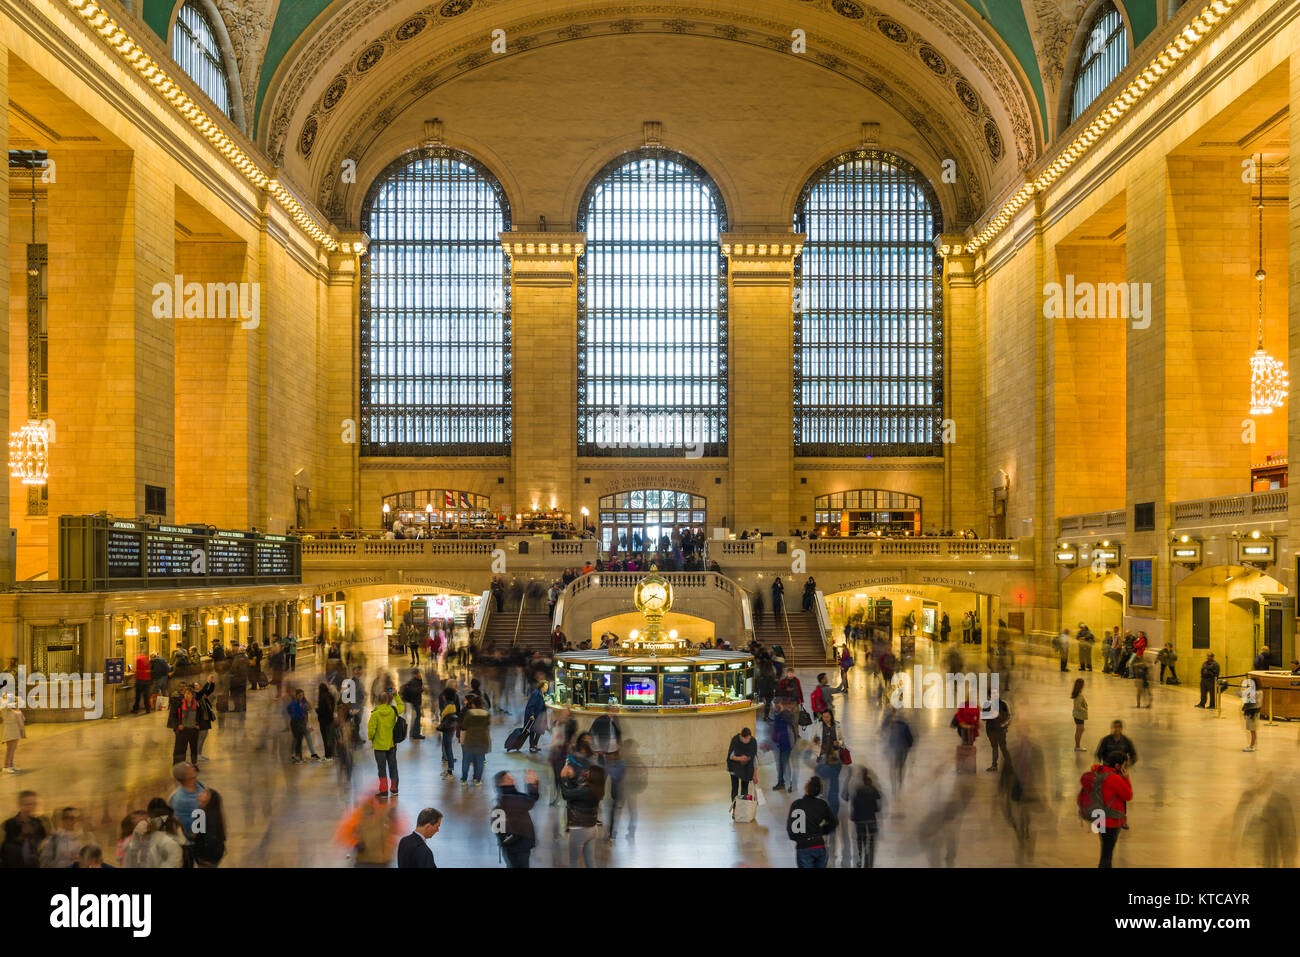 The main concourse interior of Grand Central Terminal with crowds of commuters and tourists, Midtown Manhattan, New York, USA Stock Photo